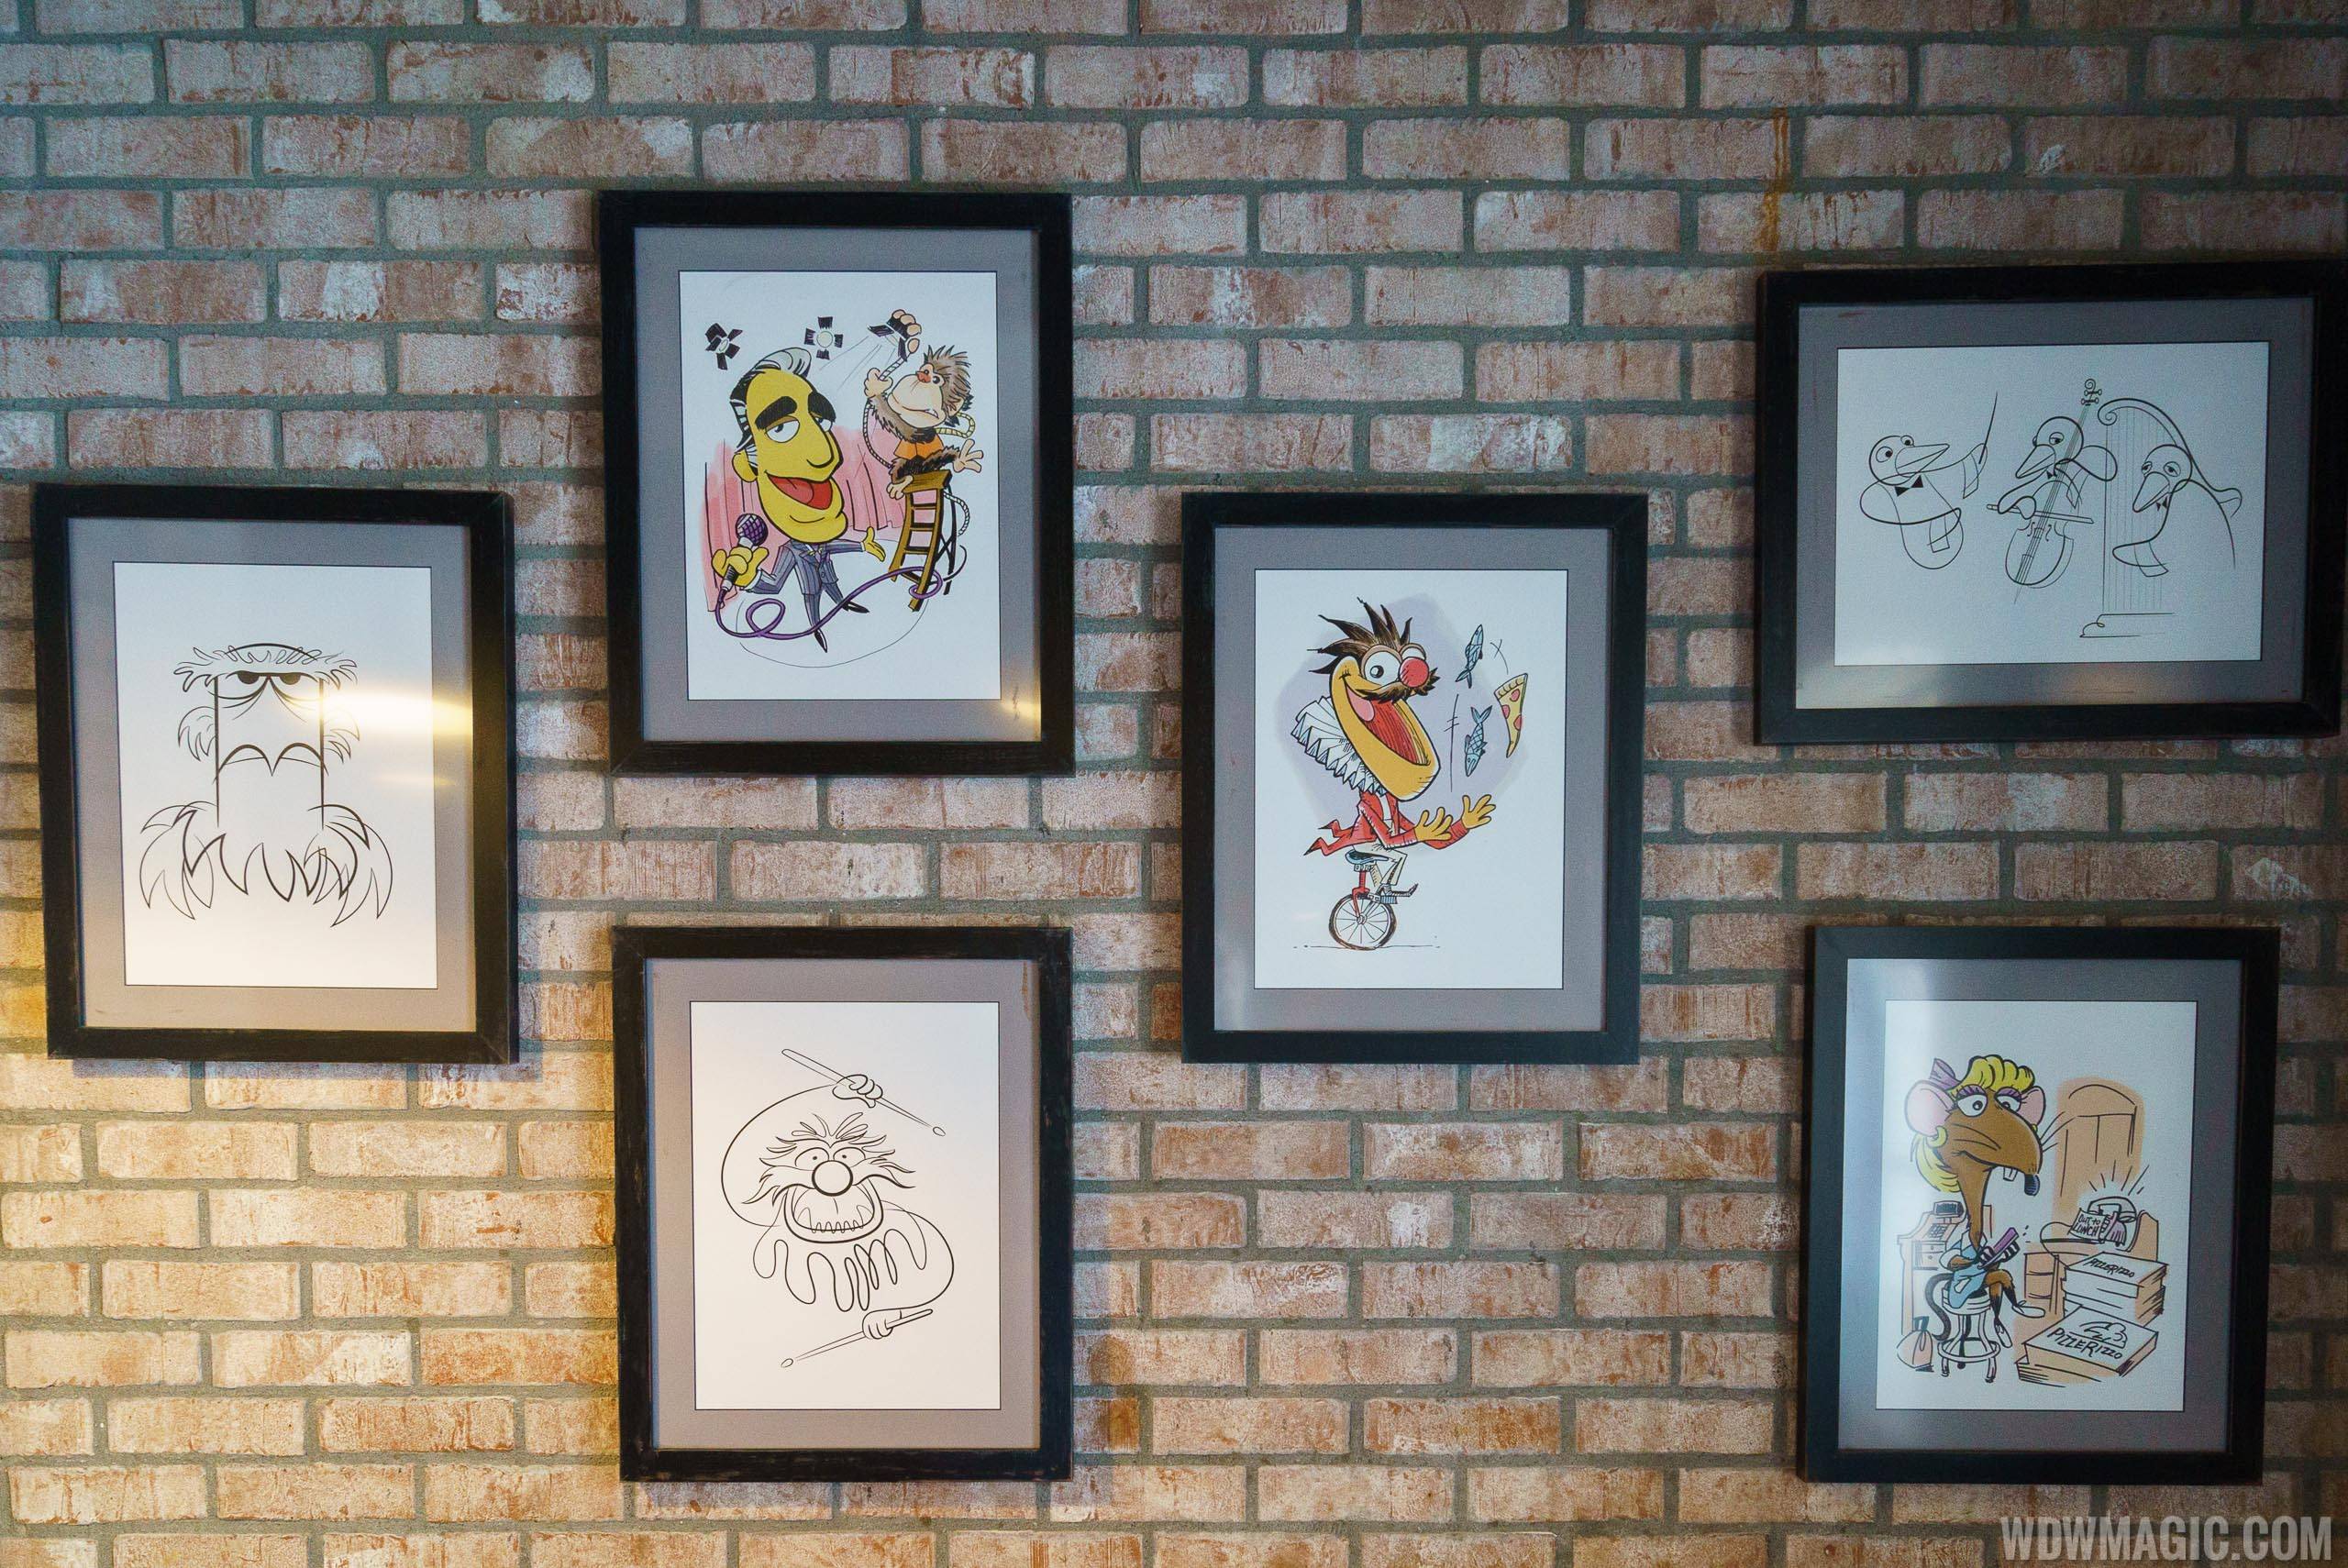 Inside PizzeRizzo - Muppets artwork on the second level